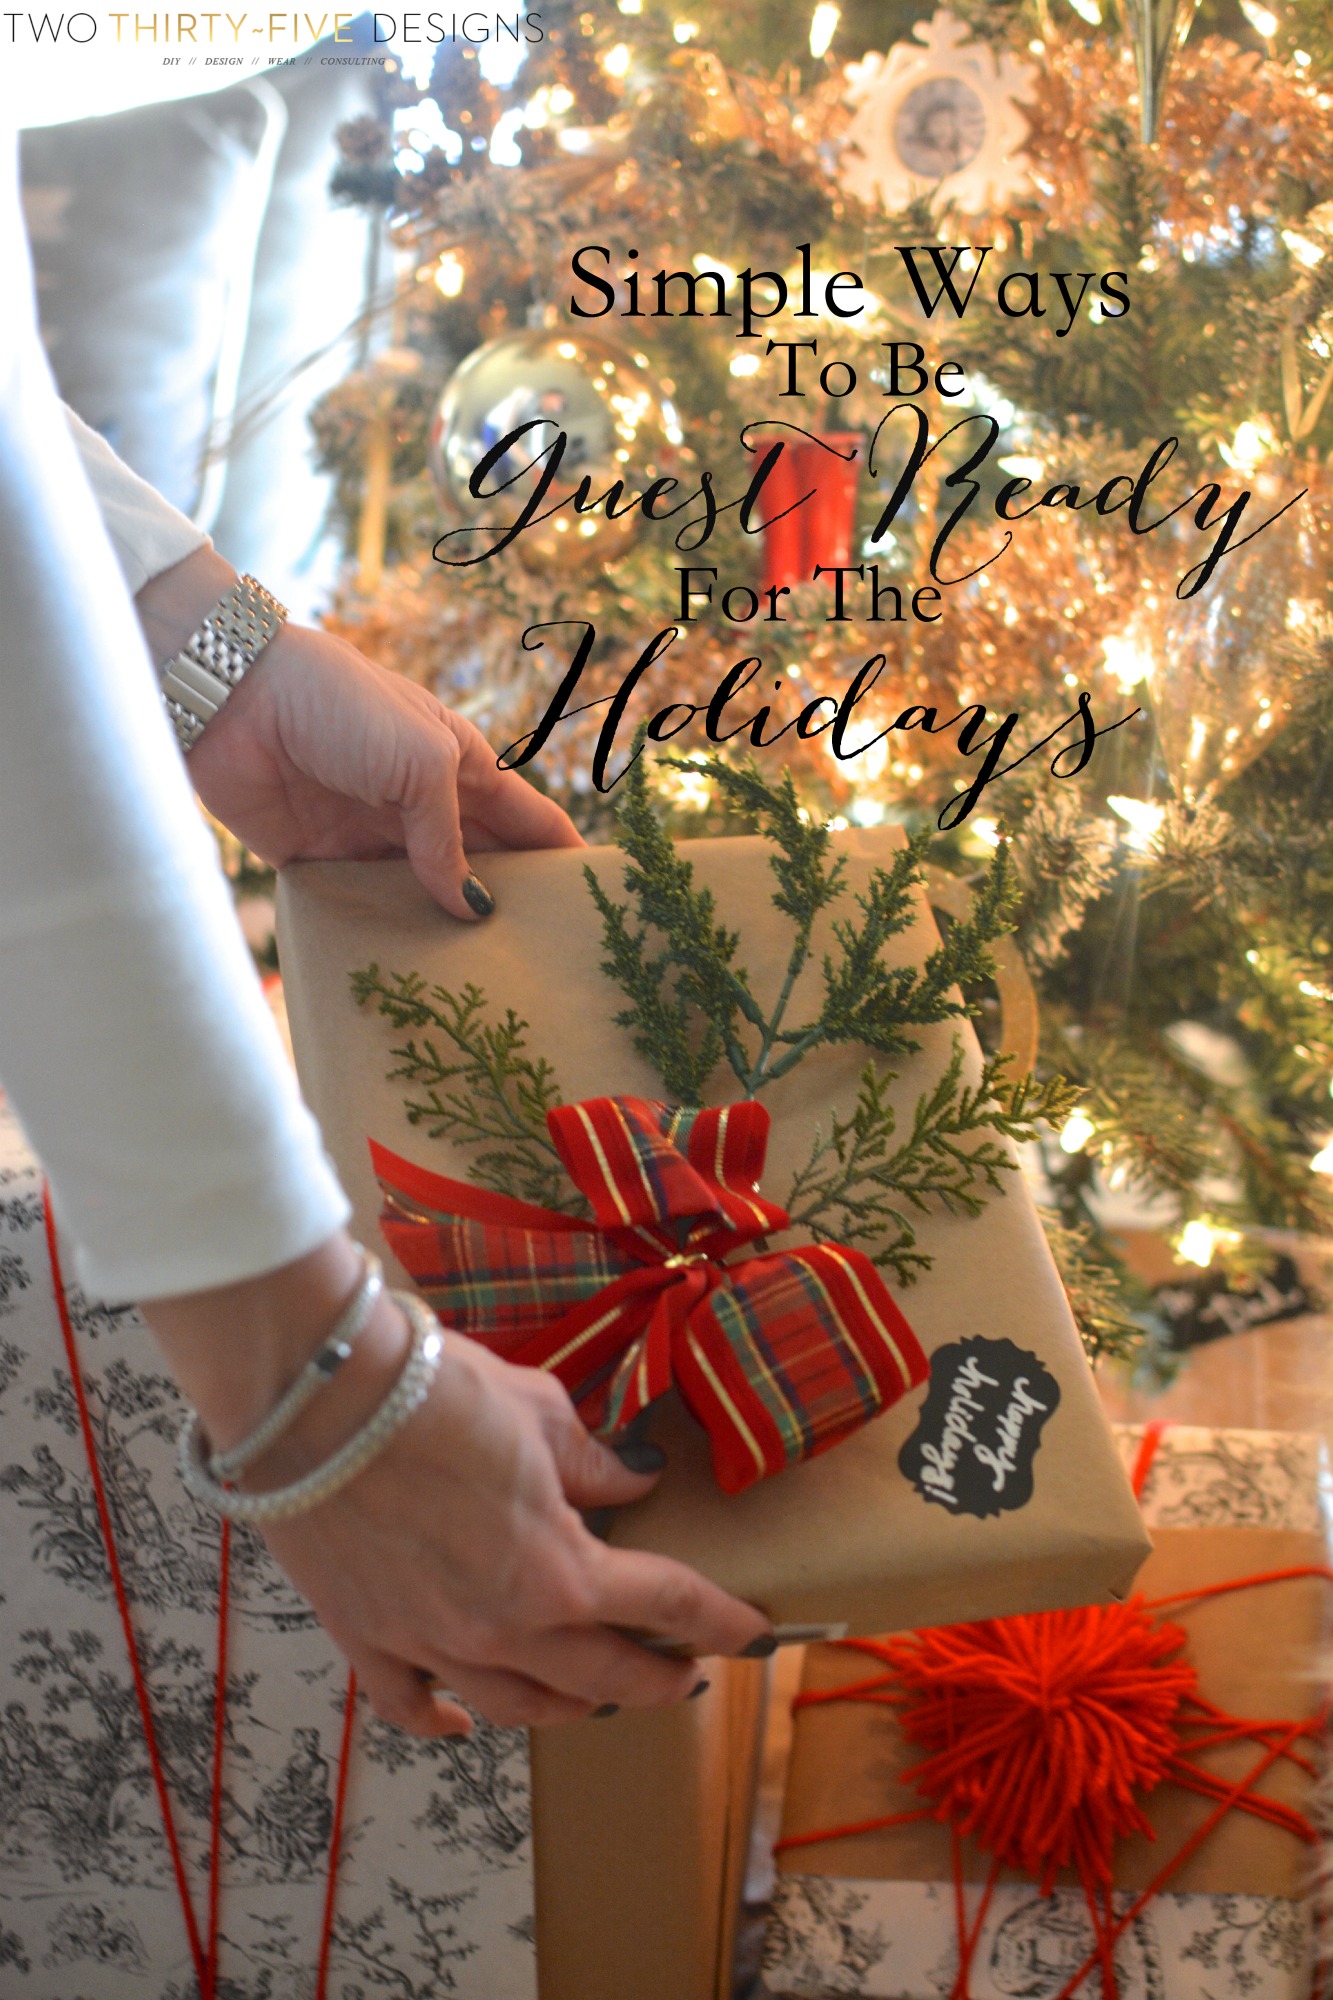 Simple Ways To Be Guest Ready For The Holidays